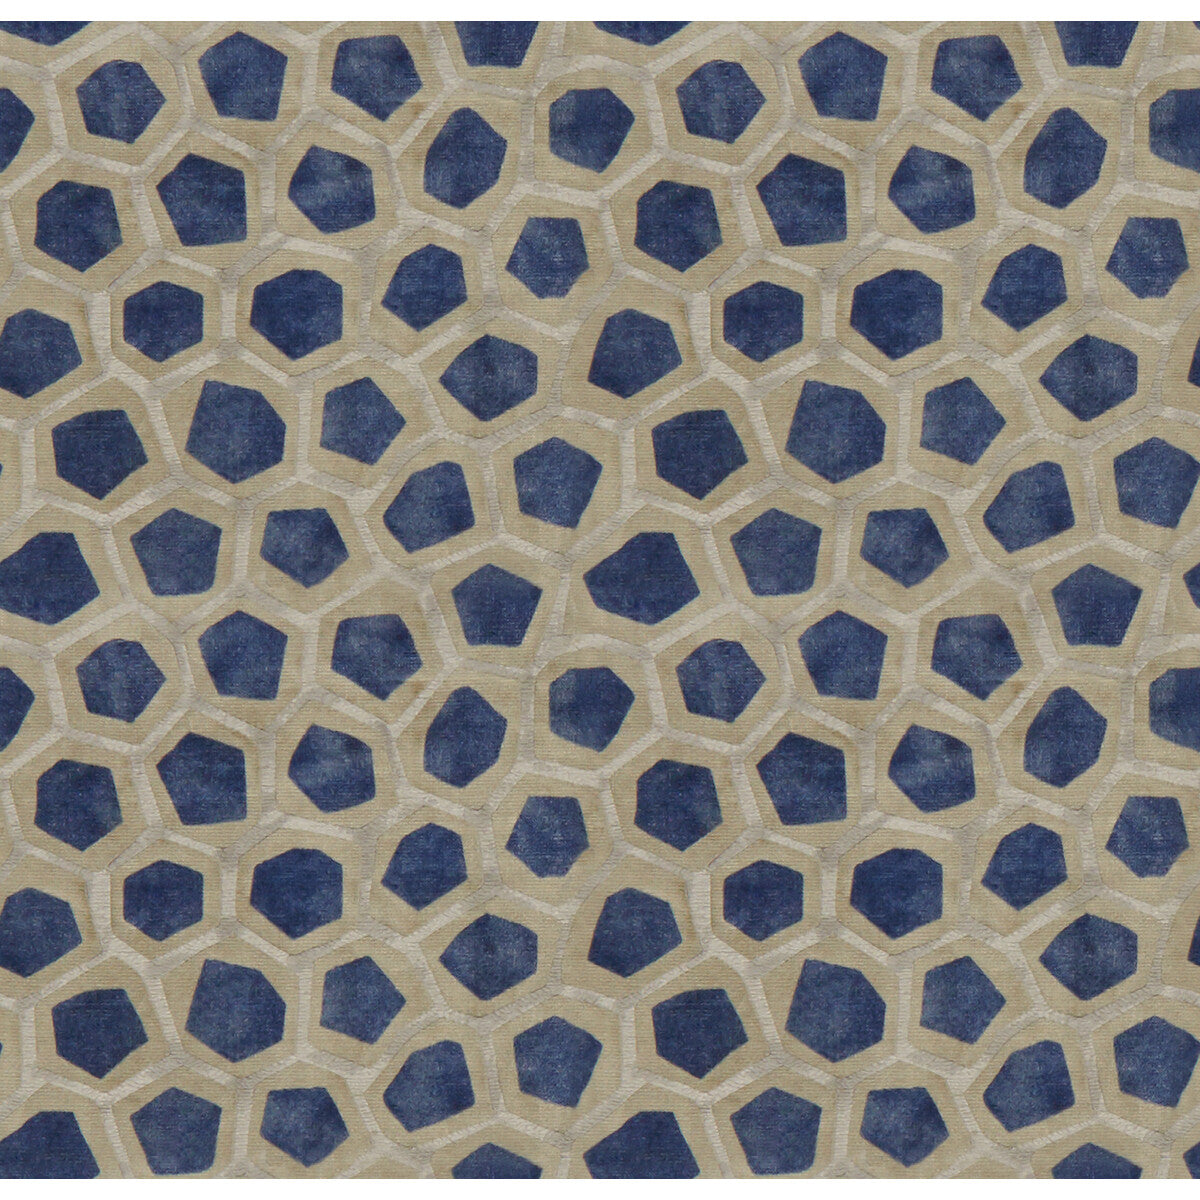 Hexagon Velvet fabric in sapphire color - pattern GWF-3705.1650.0 - by Lee Jofa Modern in the Prism collection